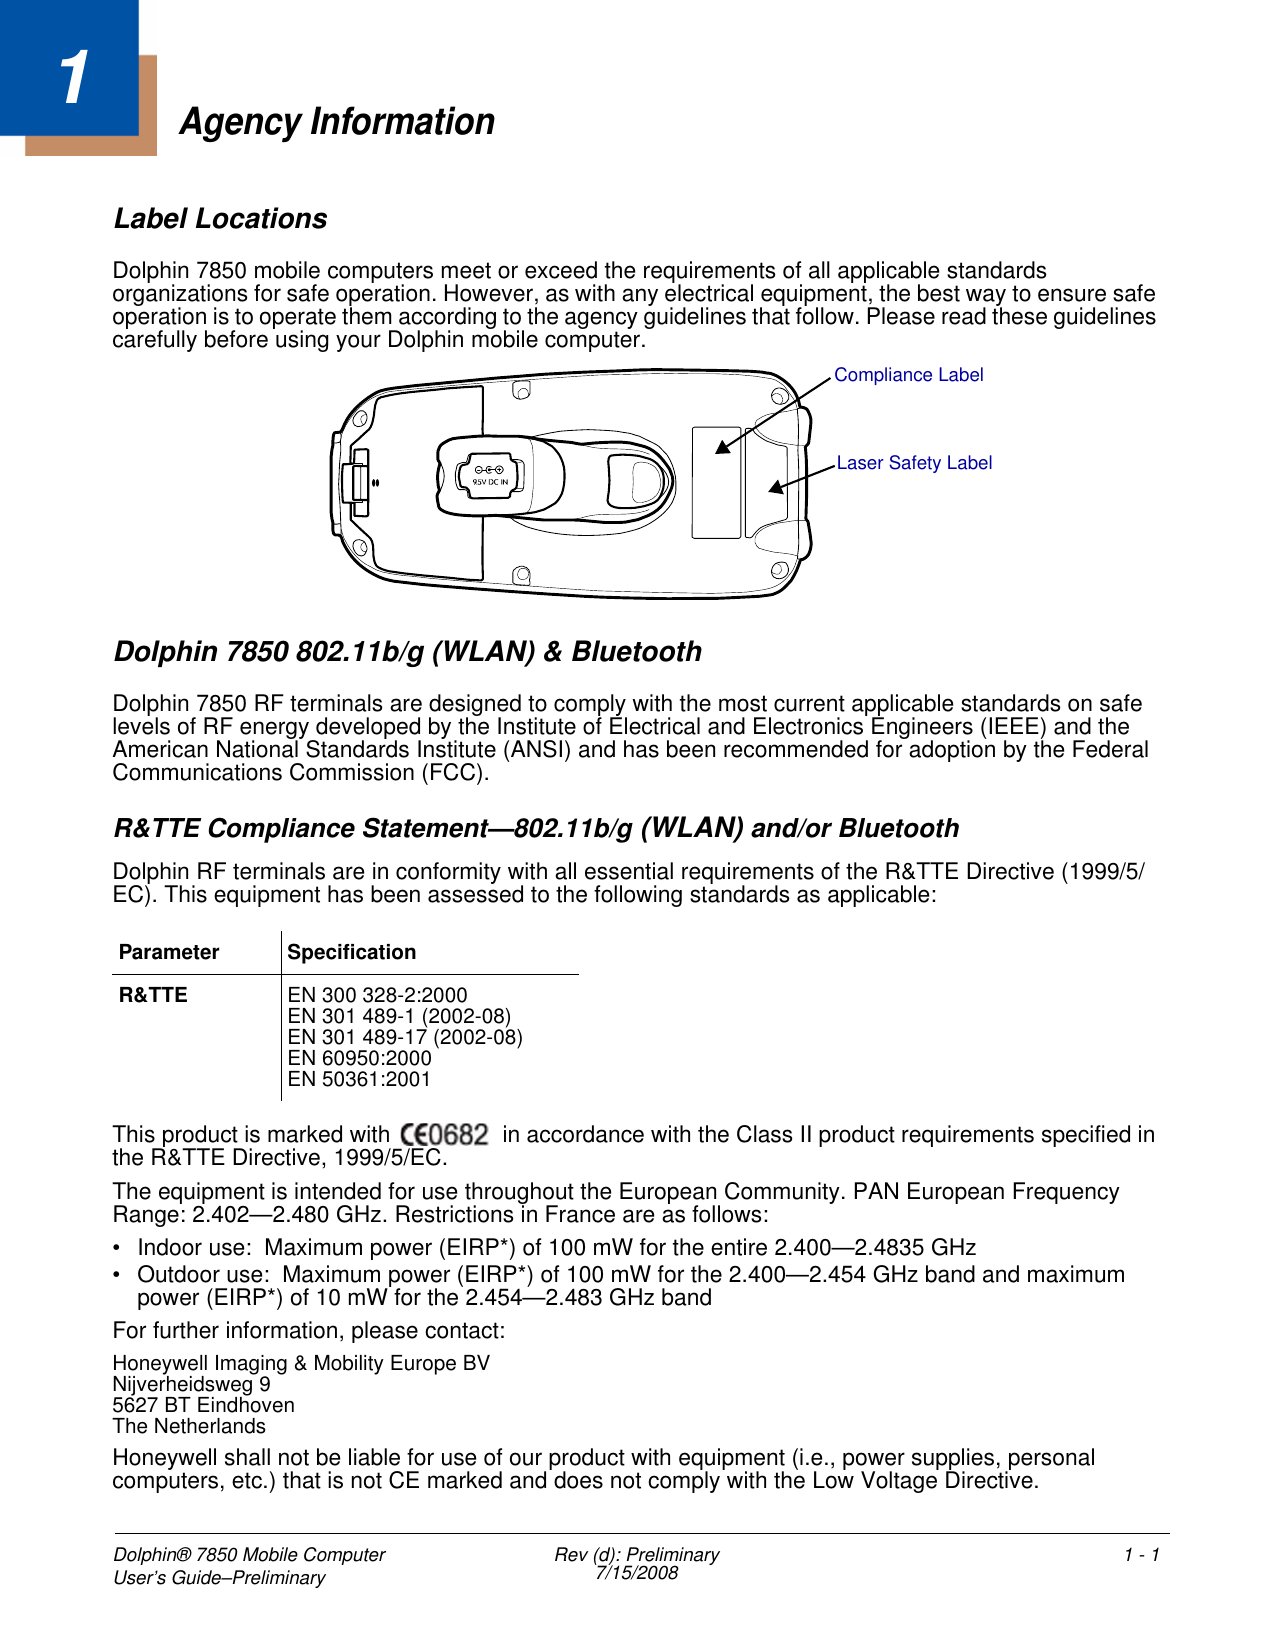 Dolphin® 7850 Mobile Computer User’s Guide–Preliminary  Rev (d): Preliminary7/15/2008 1 - 11Agency InformationLabel LocationsDolphin 7850 mobile computers meet or exceed the requirements of all applicable standards organizations for safe operation. However, as with any electrical equipment, the best way to ensure safe operation is to operate them according to the agency guidelines that follow. Please read these guidelines carefully before using your Dolphin mobile computer. Dolphin 7850 802.11b/g (WLAN) &amp; BluetoothDolphin 7850 RF terminals are designed to comply with the most current applicable standards on safe levels of RF energy developed by the Institute of Electrical and Electronics Engineers (IEEE) and the American National Standards Institute (ANSI) and has been recommended for adoption by the Federal Communications Commission (FCC). R&amp;TTE Compliance Statement—802.11b/g (WLAN) and/or BluetoothDolphin RF terminals are in conformity with all essential requirements of the R&amp;TTE Directive (1999/5/EC). This equipment has been assessed to the following standards as applicable: This product is marked with   in accordance with the Class II product requirements specified in the R&amp;TTE Directive, 1999/5/EC.The equipment is intended for use throughout the European Community. PAN European Frequency Range: 2.402—2.480 GHz. Restrictions in France are as follows: • Indoor use:  Maximum power (EIRP*) of 100 mW for the entire 2.400—2.4835 GHz • Outdoor use:  Maximum power (EIRP*) of 100 mW for the 2.400—2.454 GHz band and maximum power (EIRP*) of 10 mW for the 2.454—2.483 GHz bandFor further information, please contact:Honeywell Imaging &amp; Mobility Europe BVNijverheidsweg 95627 BT EindhovenThe NetherlandsHoneywell shall not be liable for use of our product with equipment (i.e., power supplies, personal computers, etc.) that is not CE marked and does not comply with the Low Voltage Directive.Parameter SpecificationR&amp;TTE EN 300 328-2:2000EN 301 489-1 (2002-08)EN 301 489-17 (2002-08)EN 60950:2000EN 50361:2001Compliance LabelLaser Safety Label